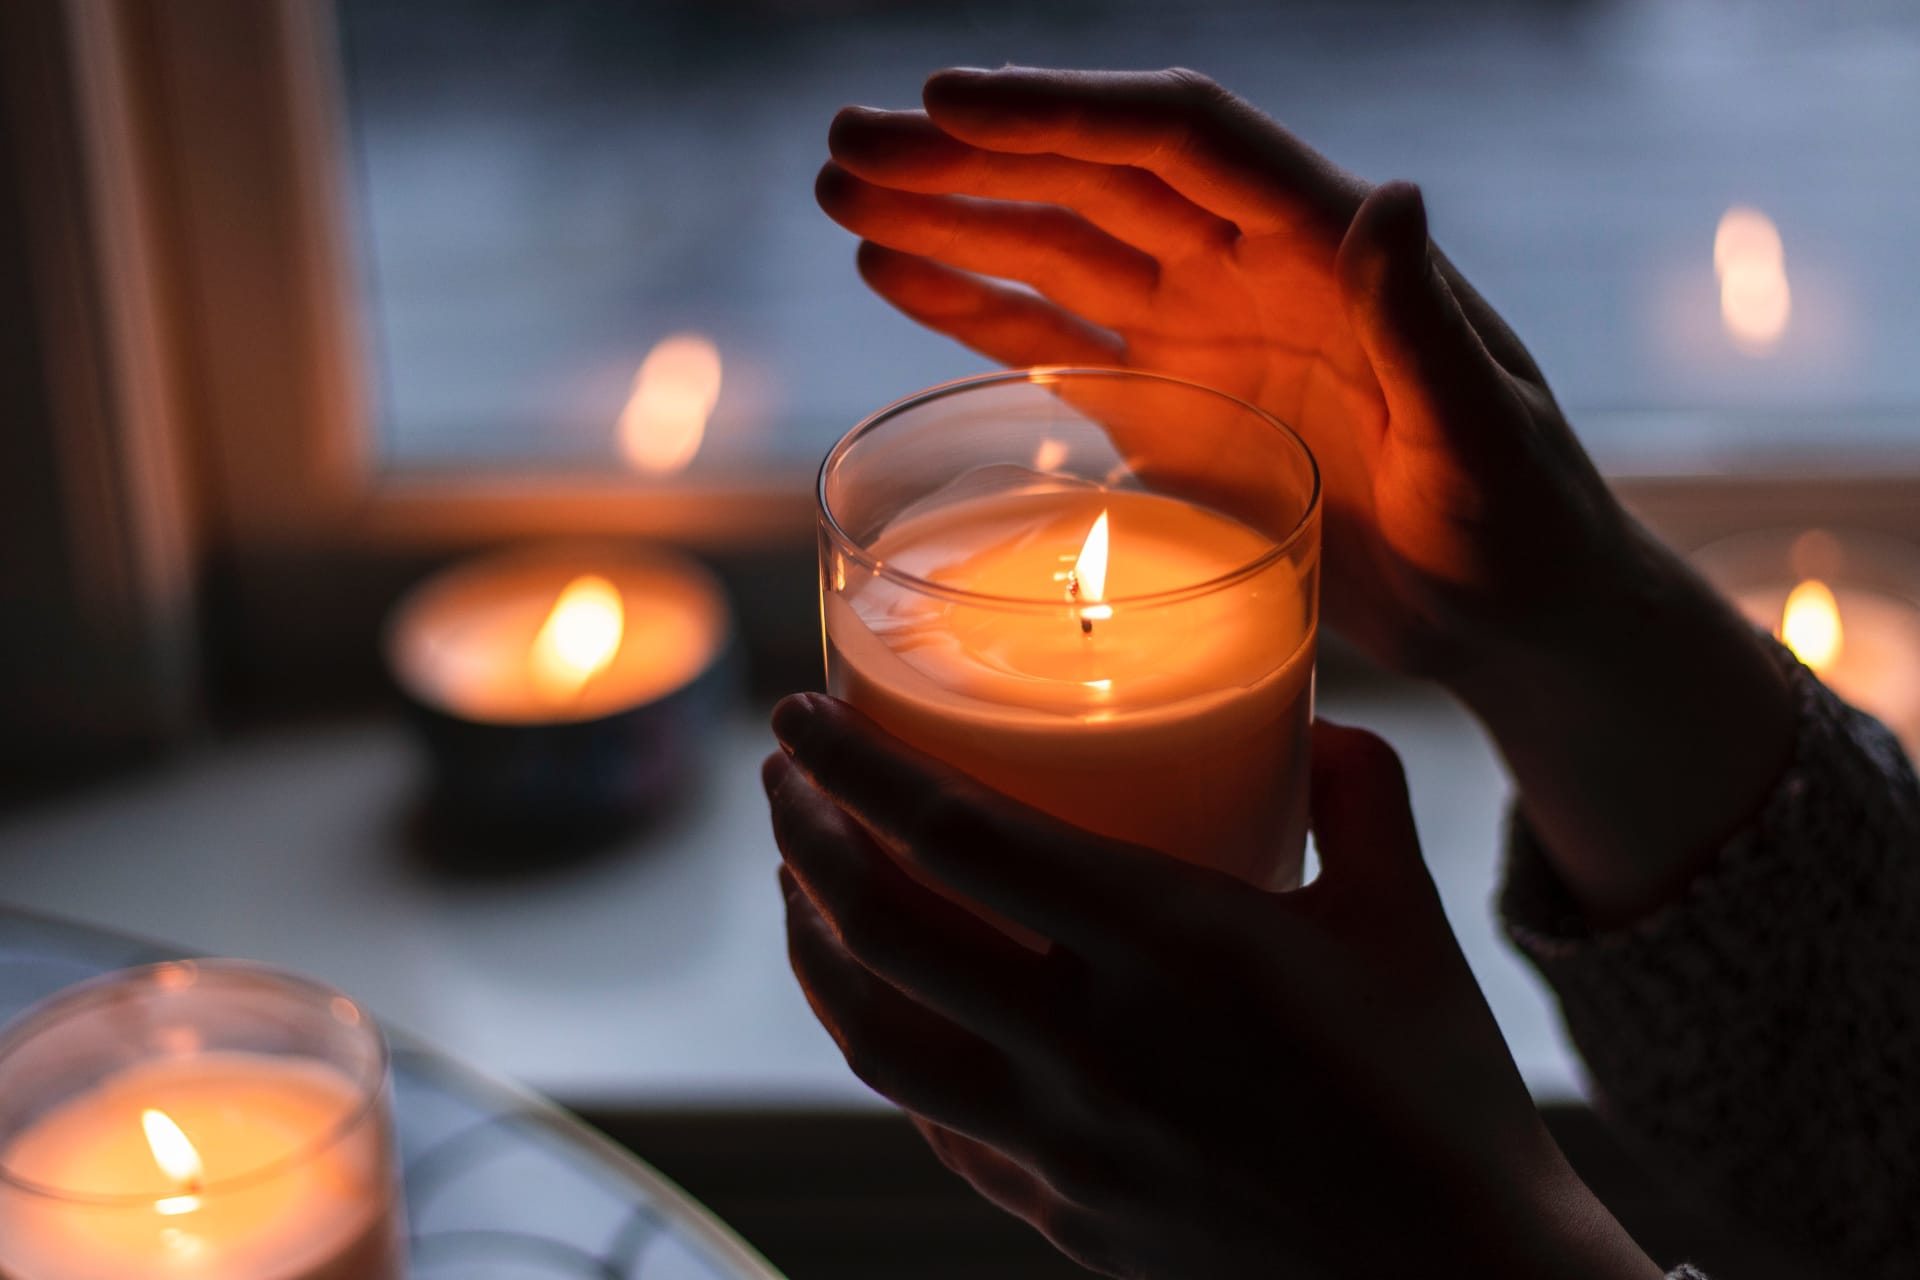 Hand holding a candle with several candles on the window sill in the background